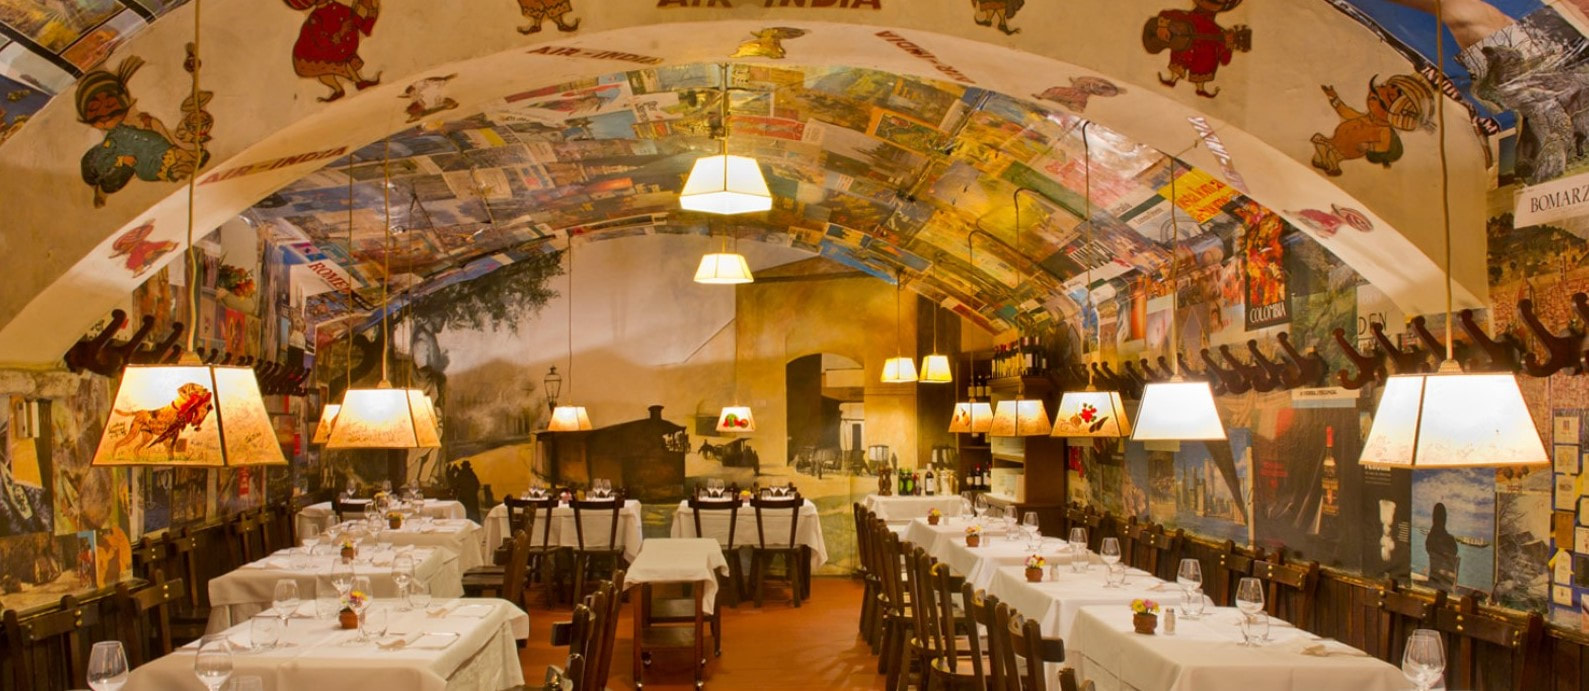 5-star dining in Florence, Italy